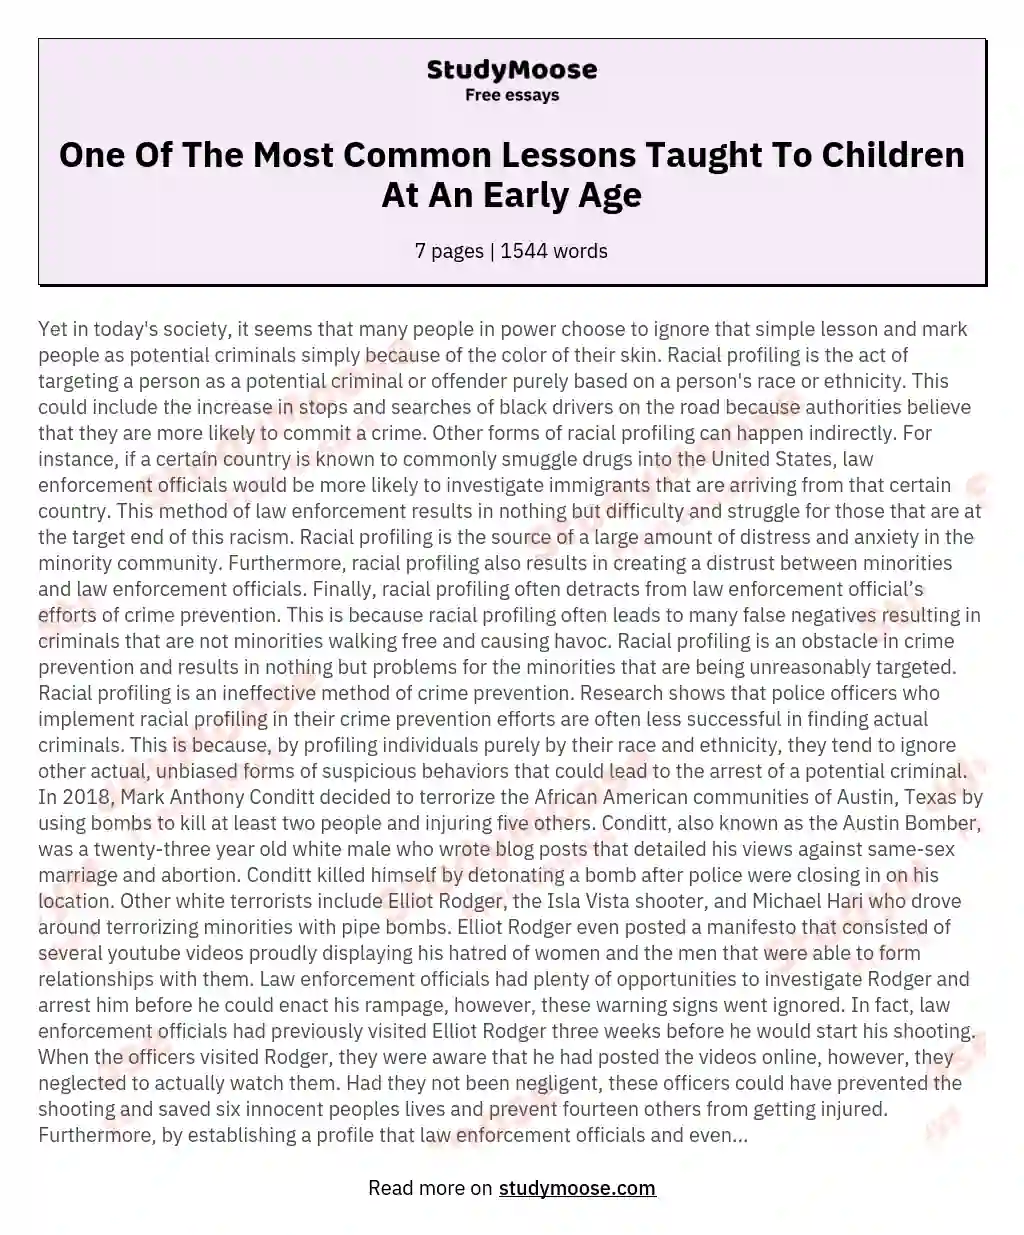 One Of The Most Common Lessons Taught To Children At An Early Age essay